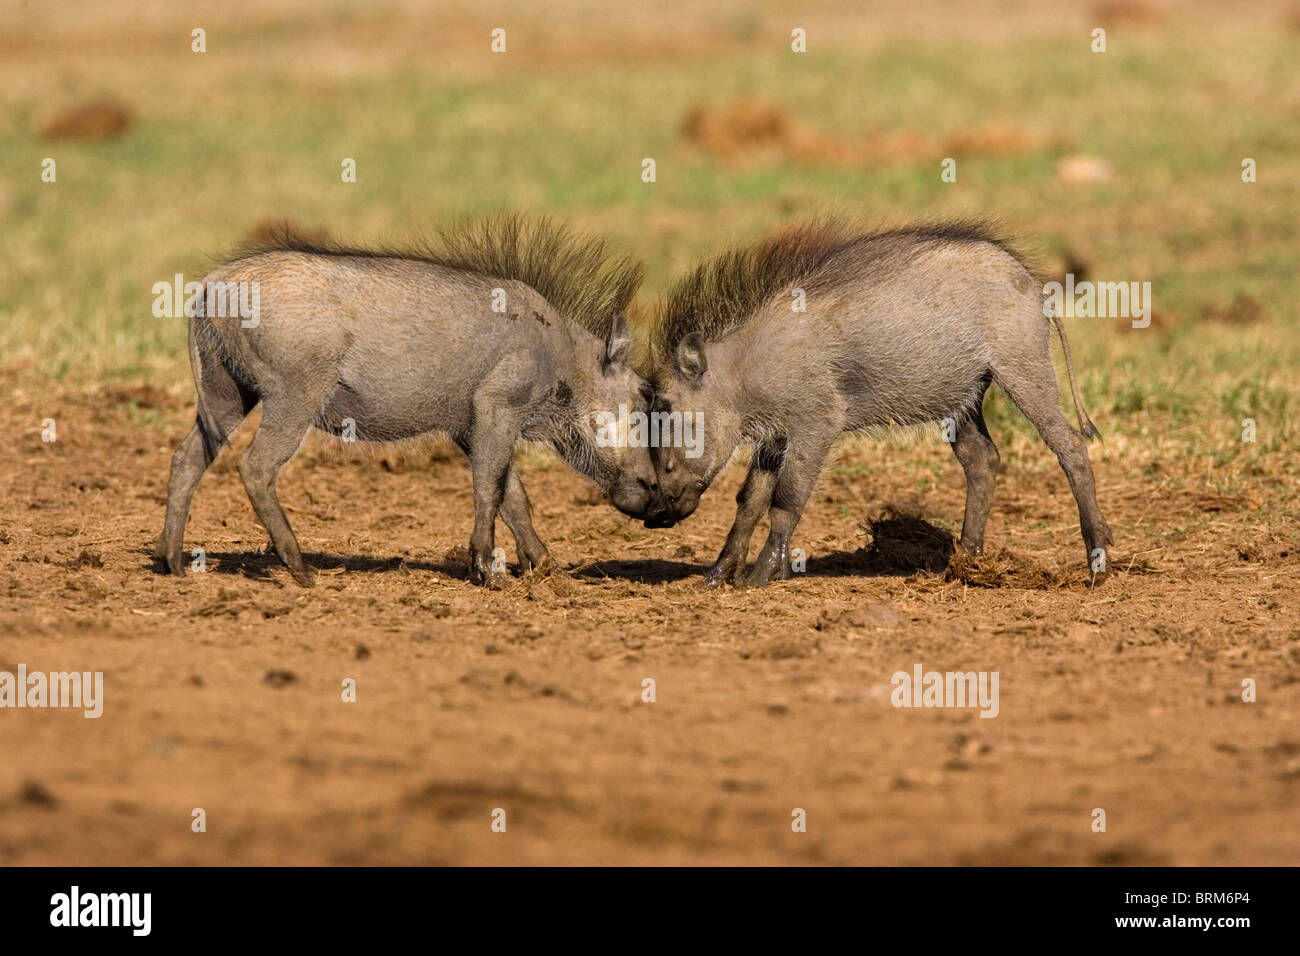 Warthog youngsters play fighting Stock Photo